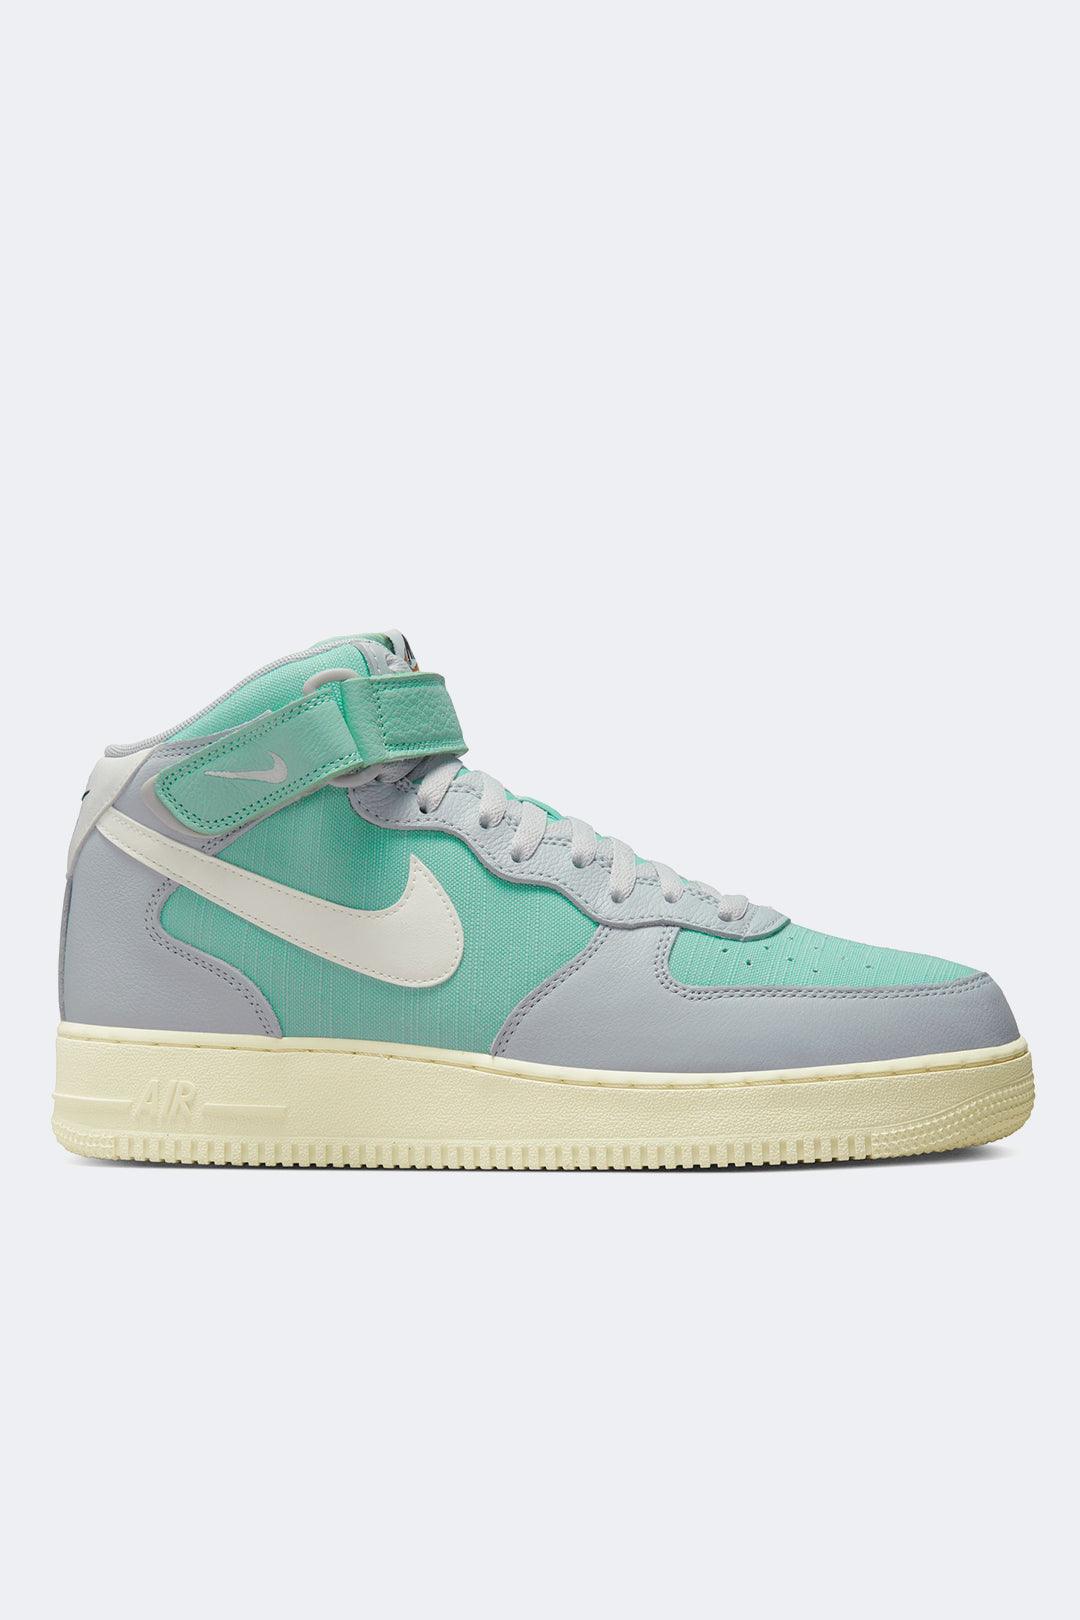 NIKE AIR FORCE 1 MID '07 LX VNTG - HYPE (7473972969639)